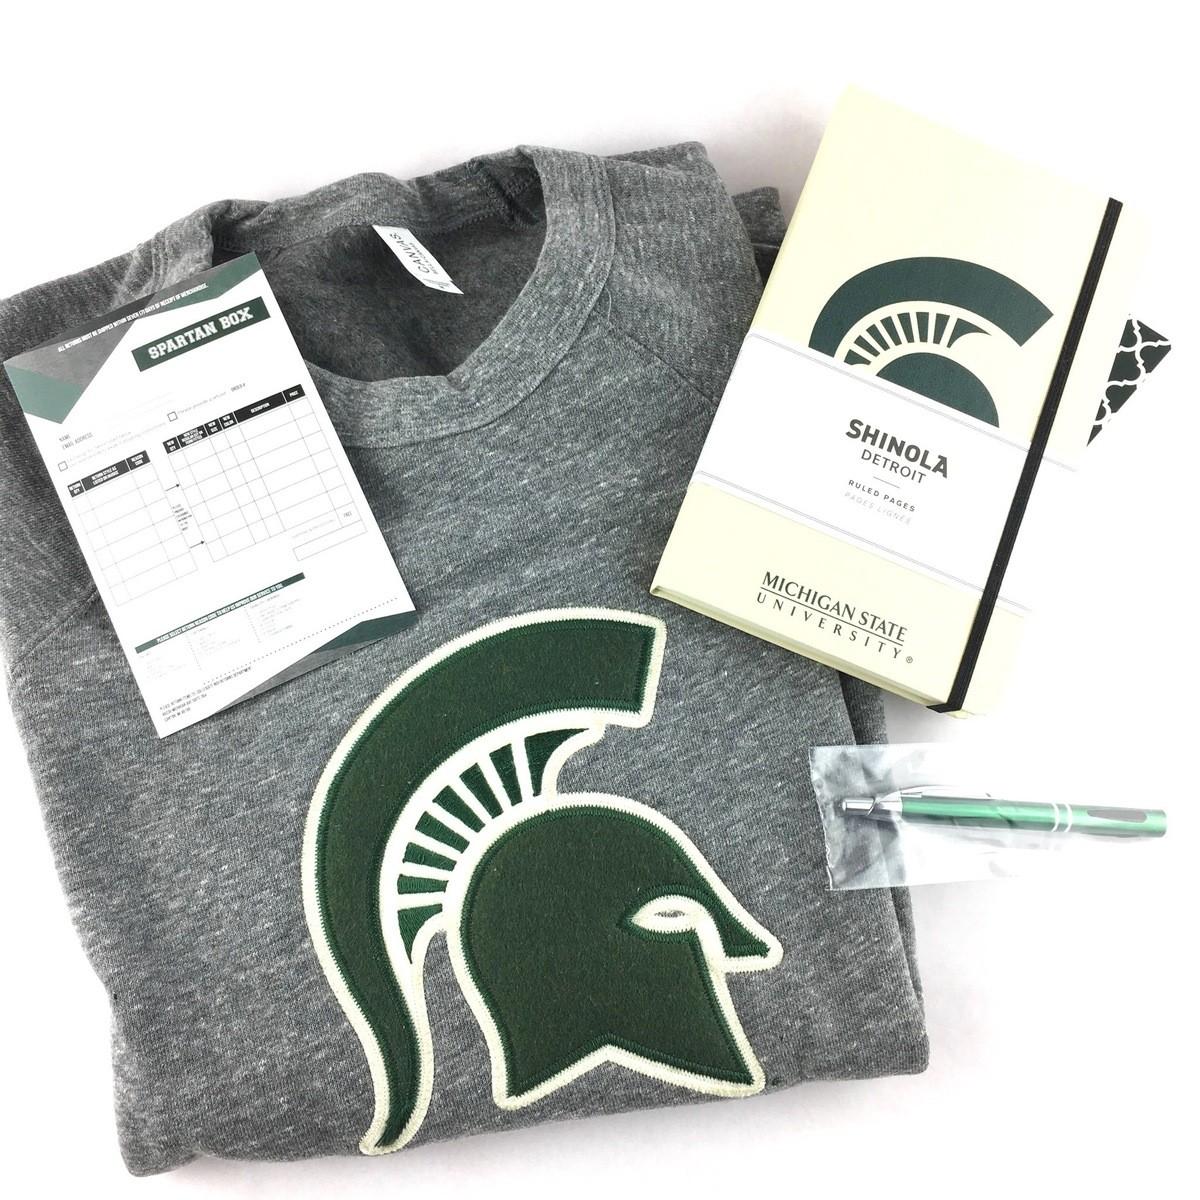 Read more about the article Spartan Box Michigan State Subscription Box Review – November 2017